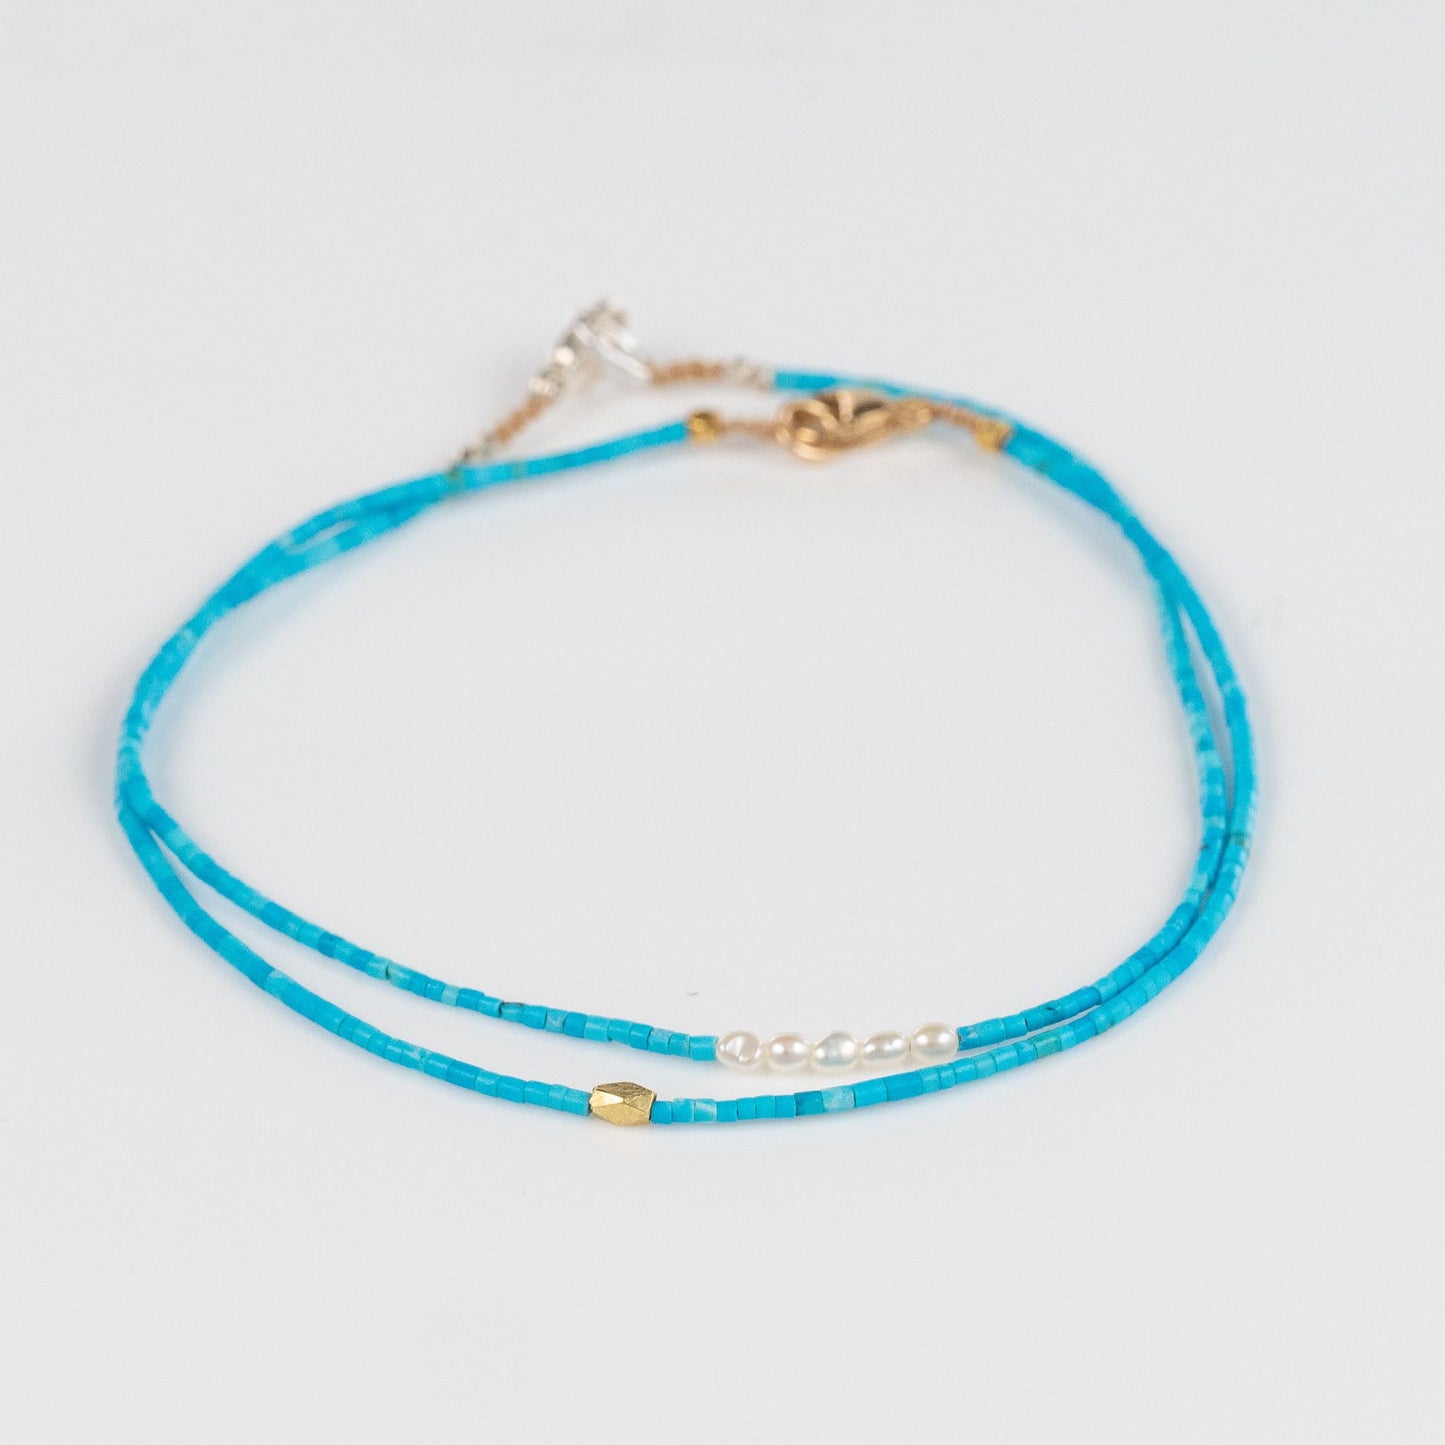 Load image into Gallery viewer, Heishi Turquoise + 5 Pearl Beaded Bracelet
